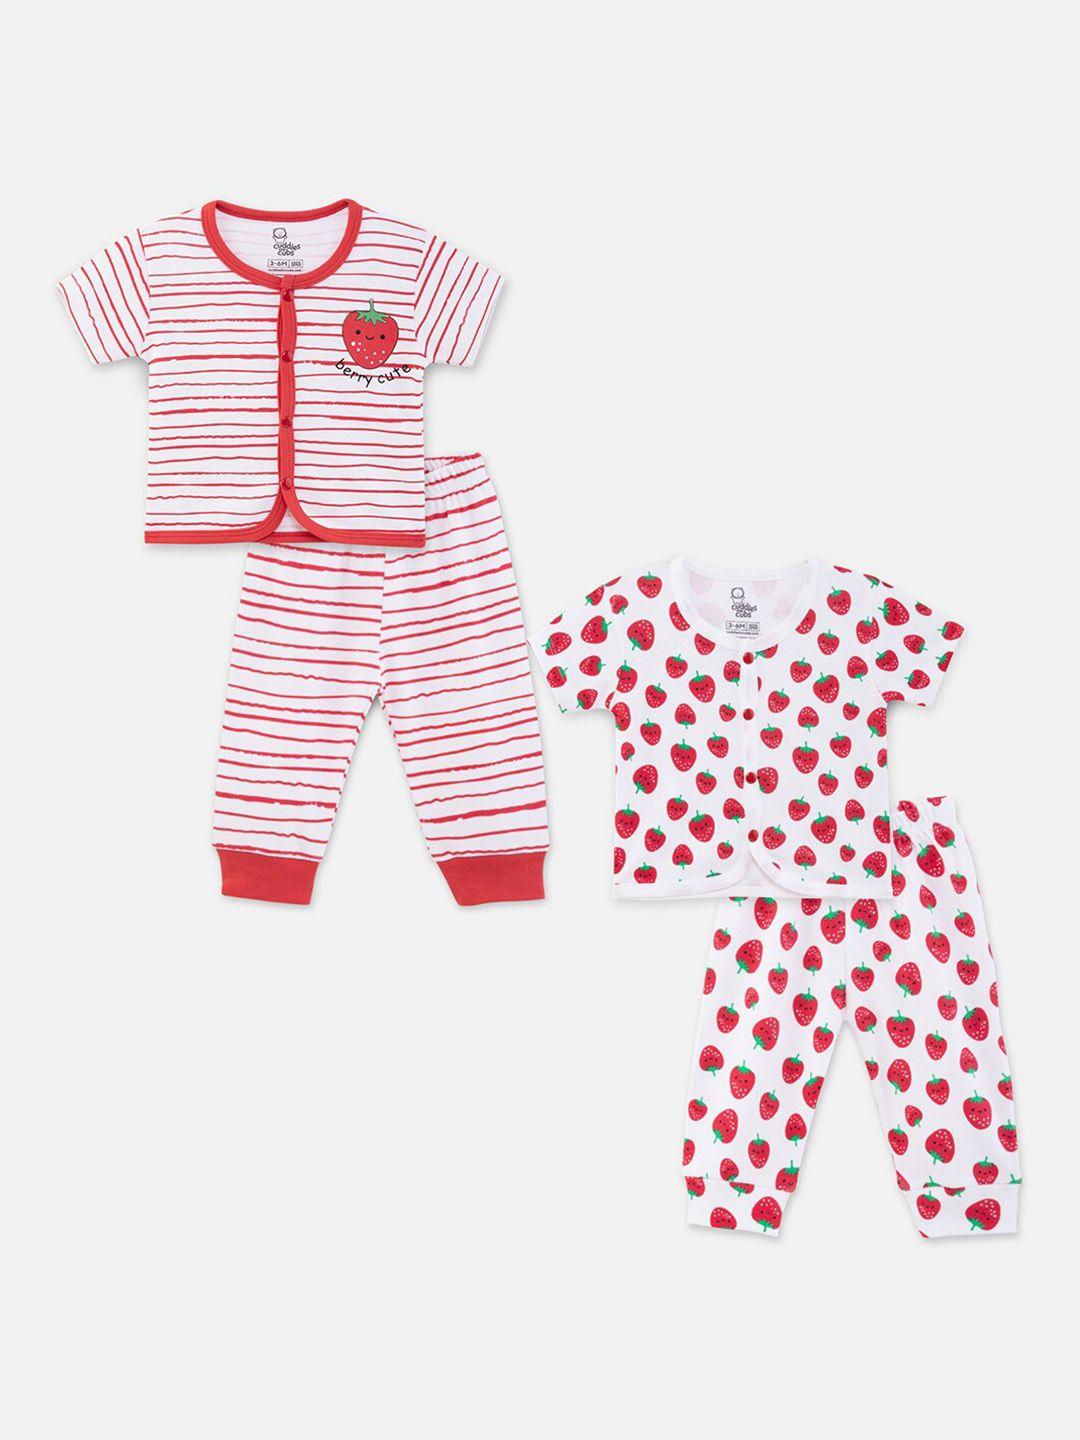 cuddles-for-cubs-pack-of-2-infants-pure-cotton-shirt-with-pyjamas